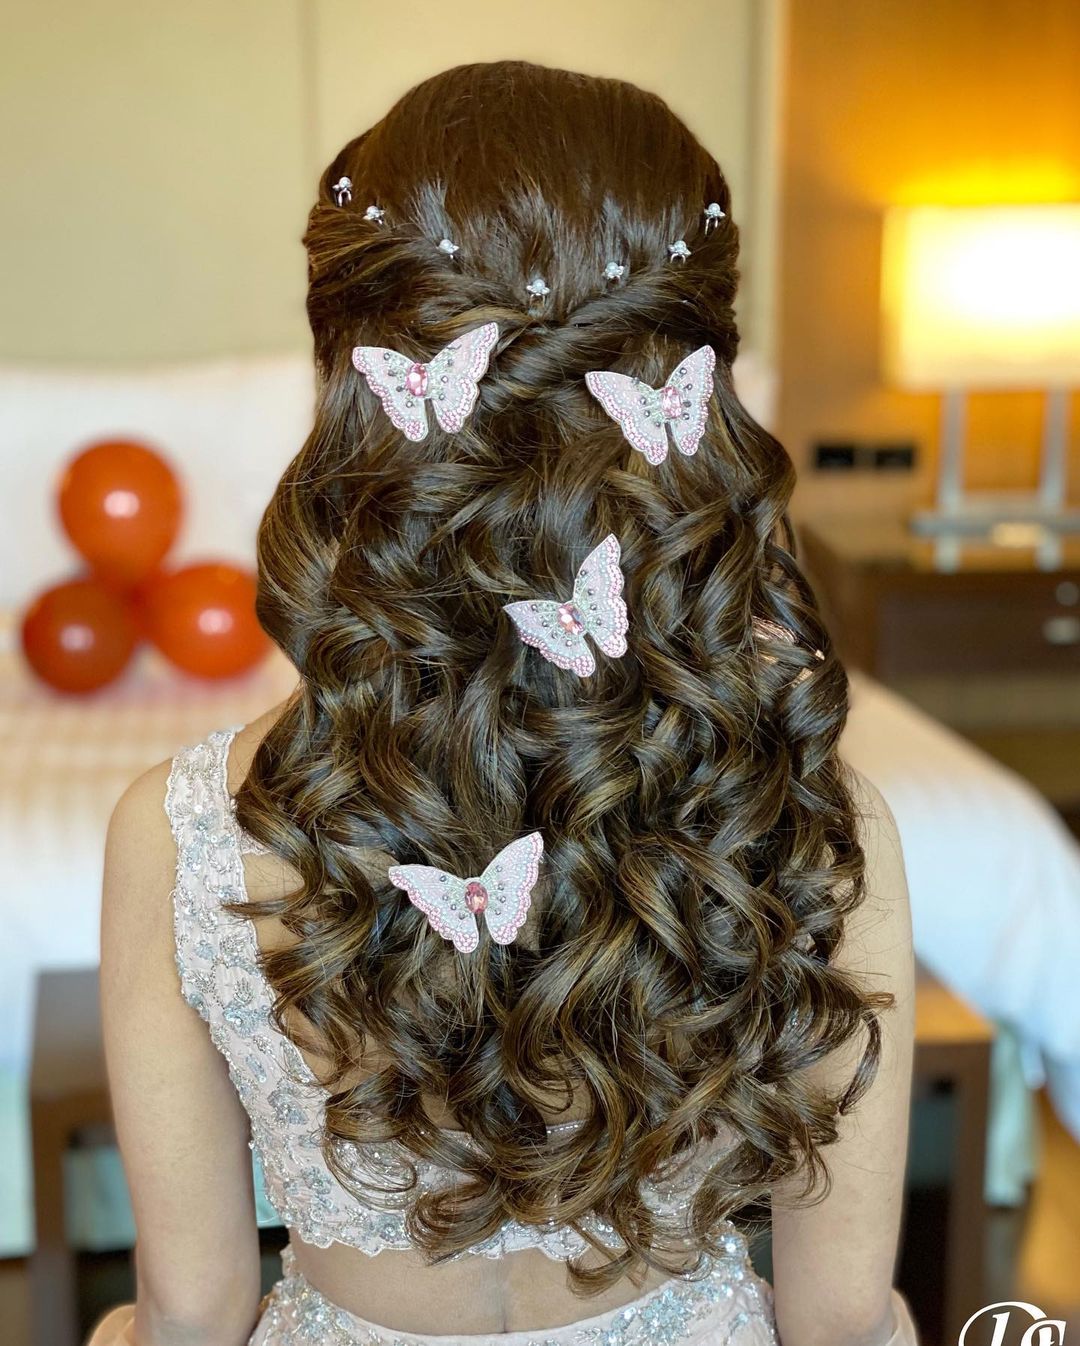 butterfly hair accessory